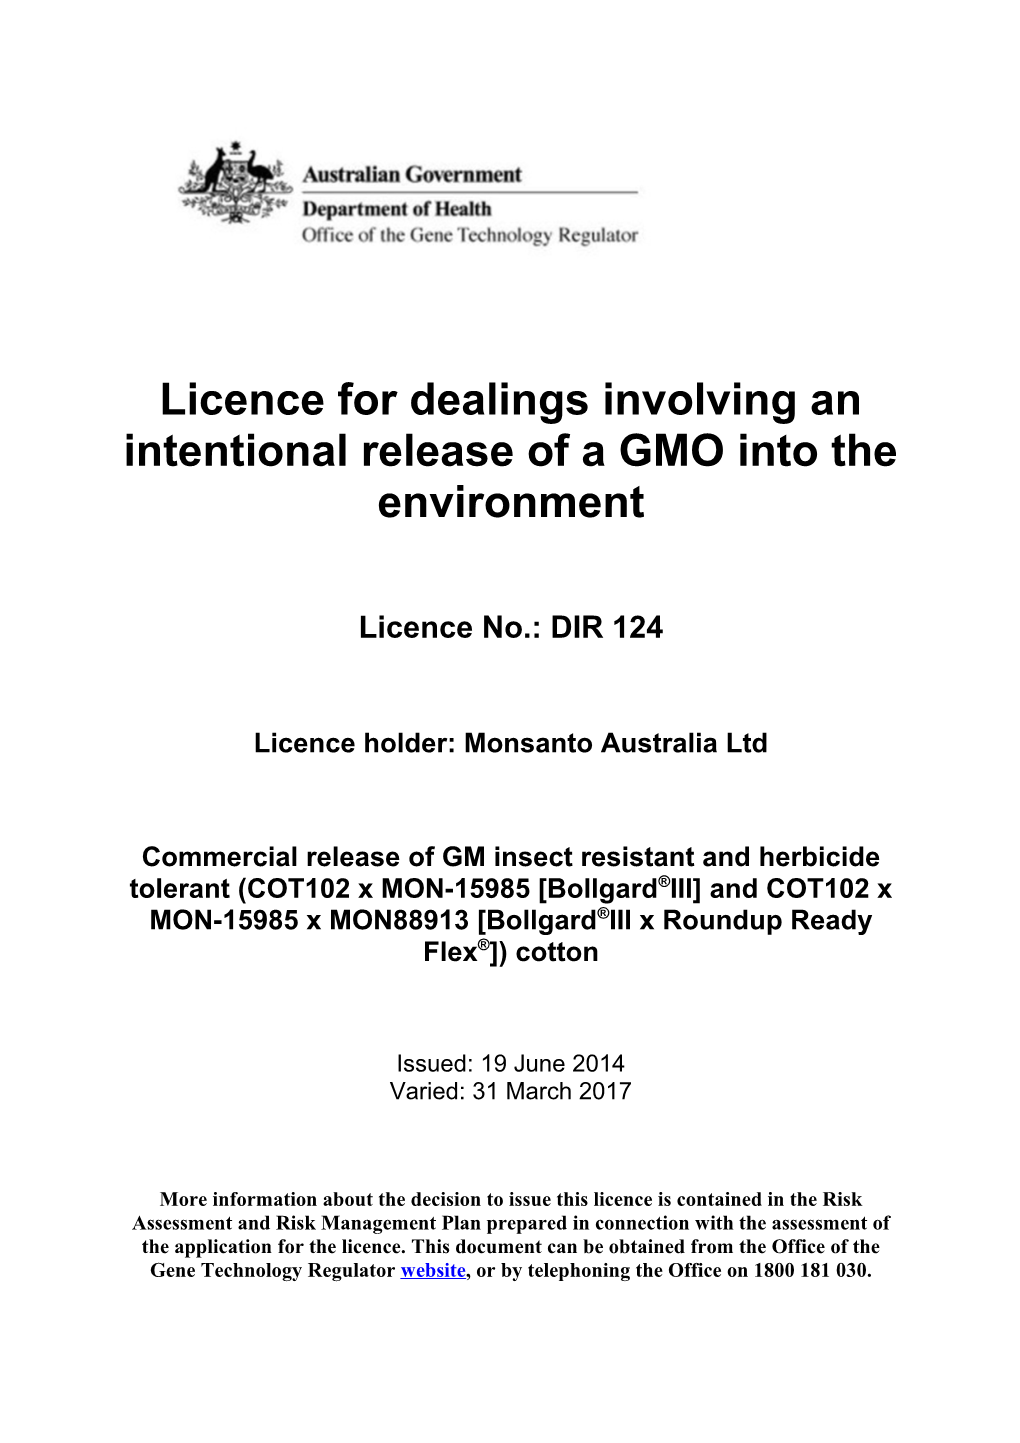 DIR 124 - Licence Conditions